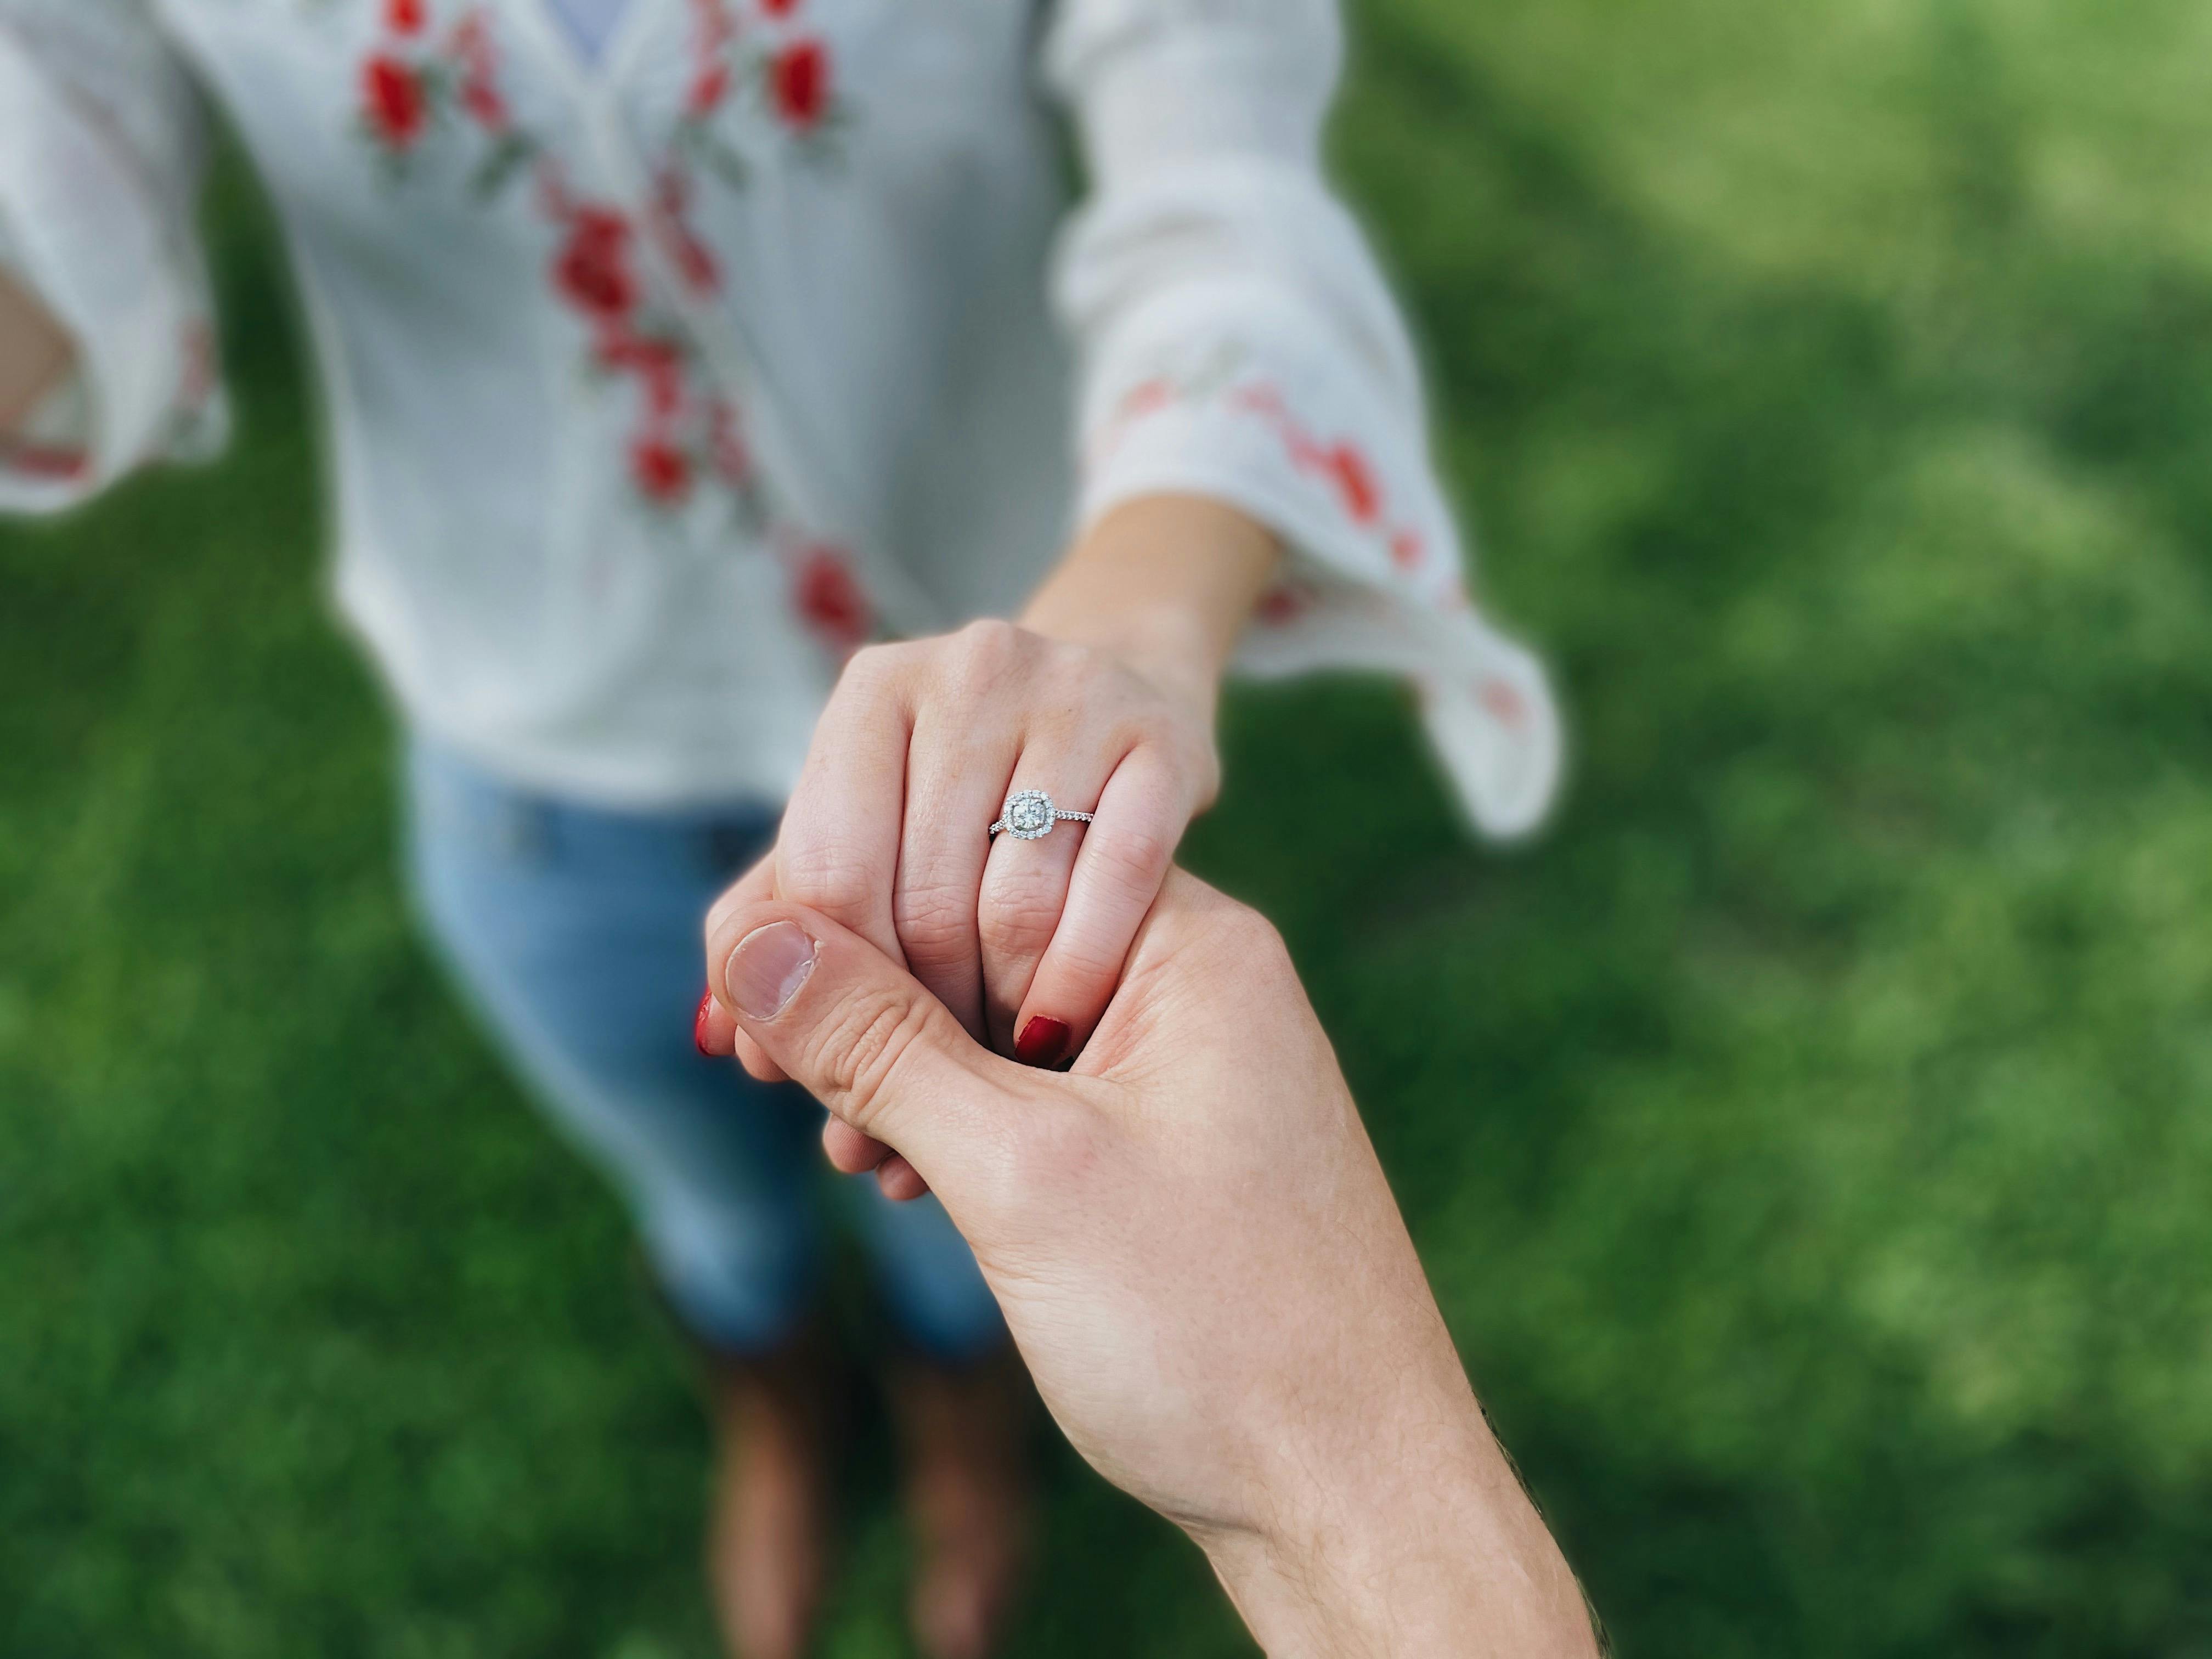 Why do we wear wedding rings on the left hand?